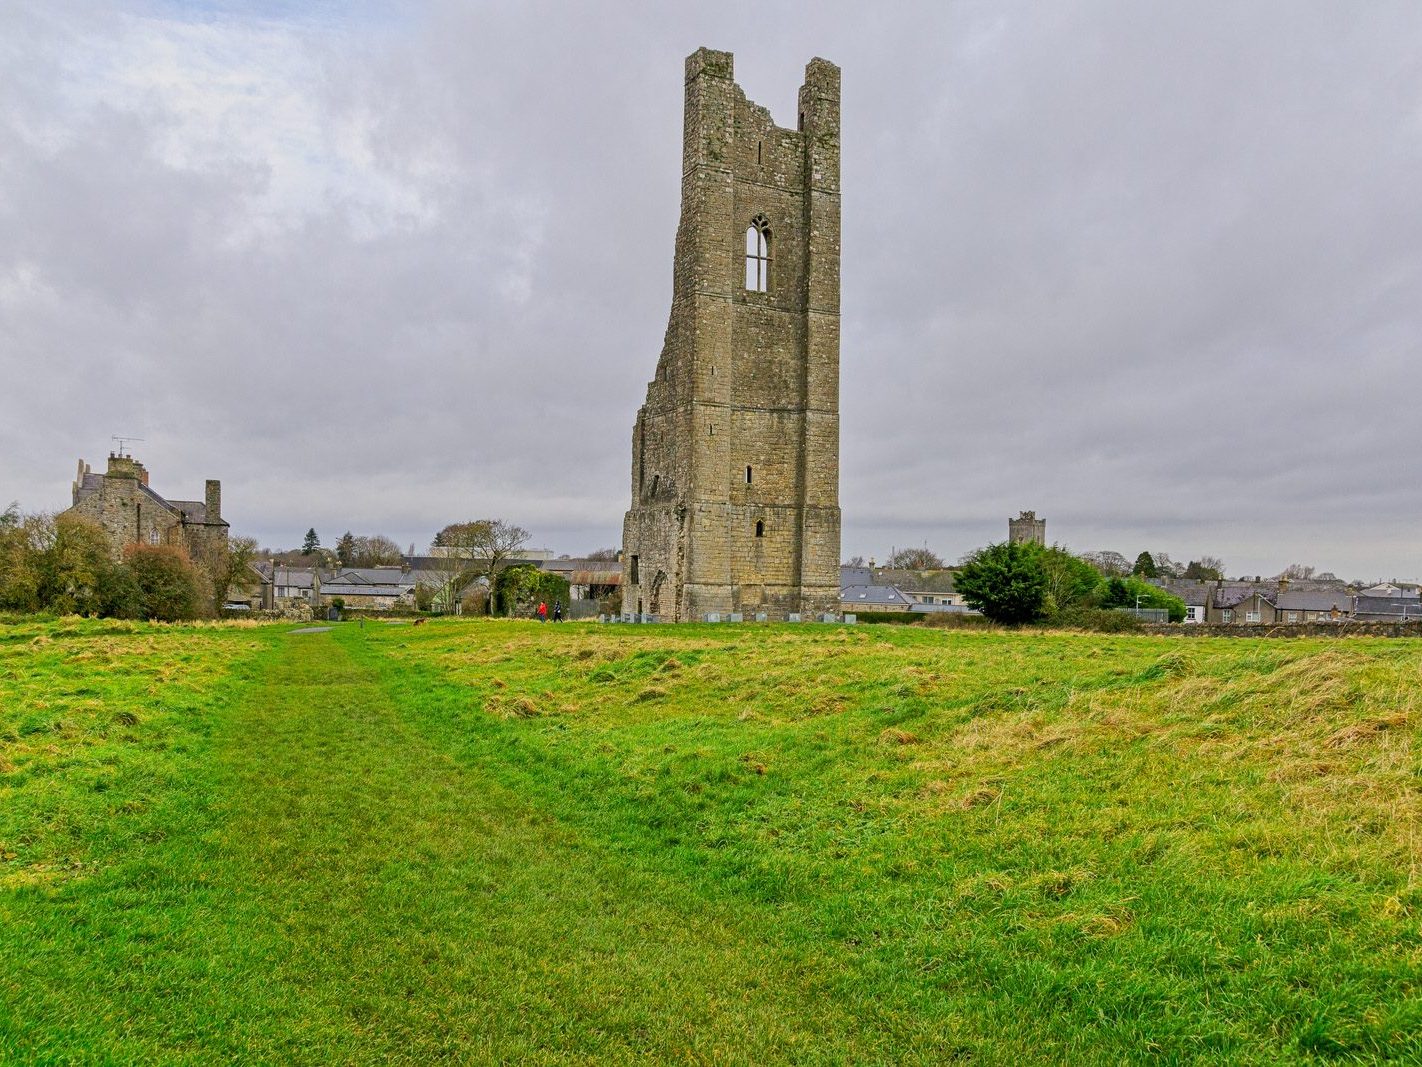 THE YELLOW STEEPLE DOMINATES THE TOWN OF TRIM [ALSO KNOWN AS ST MARYS ABBEY]-226743-1